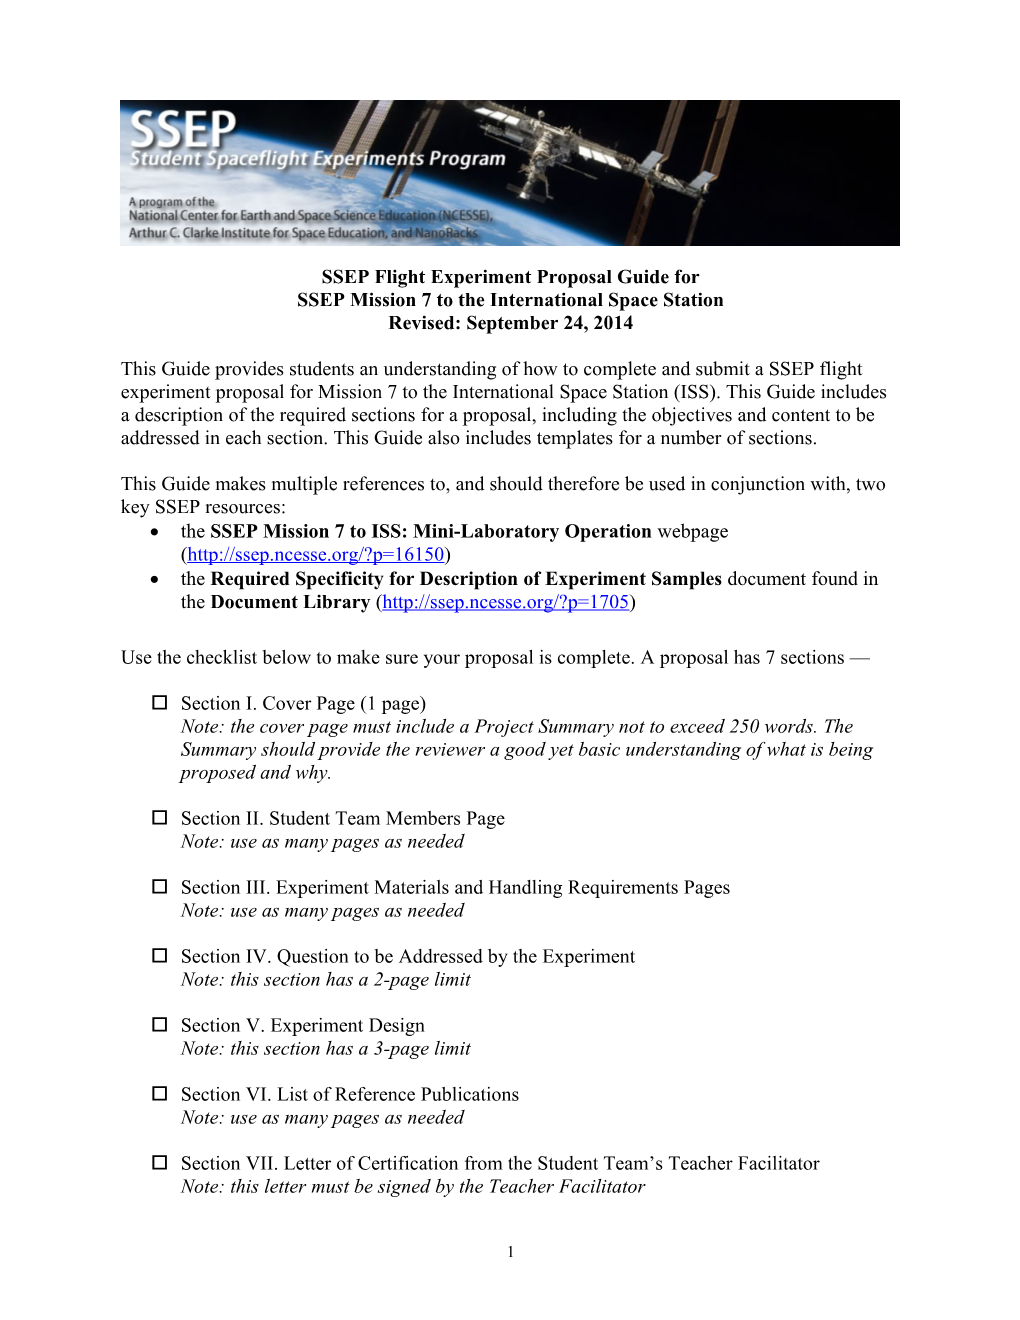 SSEP Flight Experiment Proposal Guide For